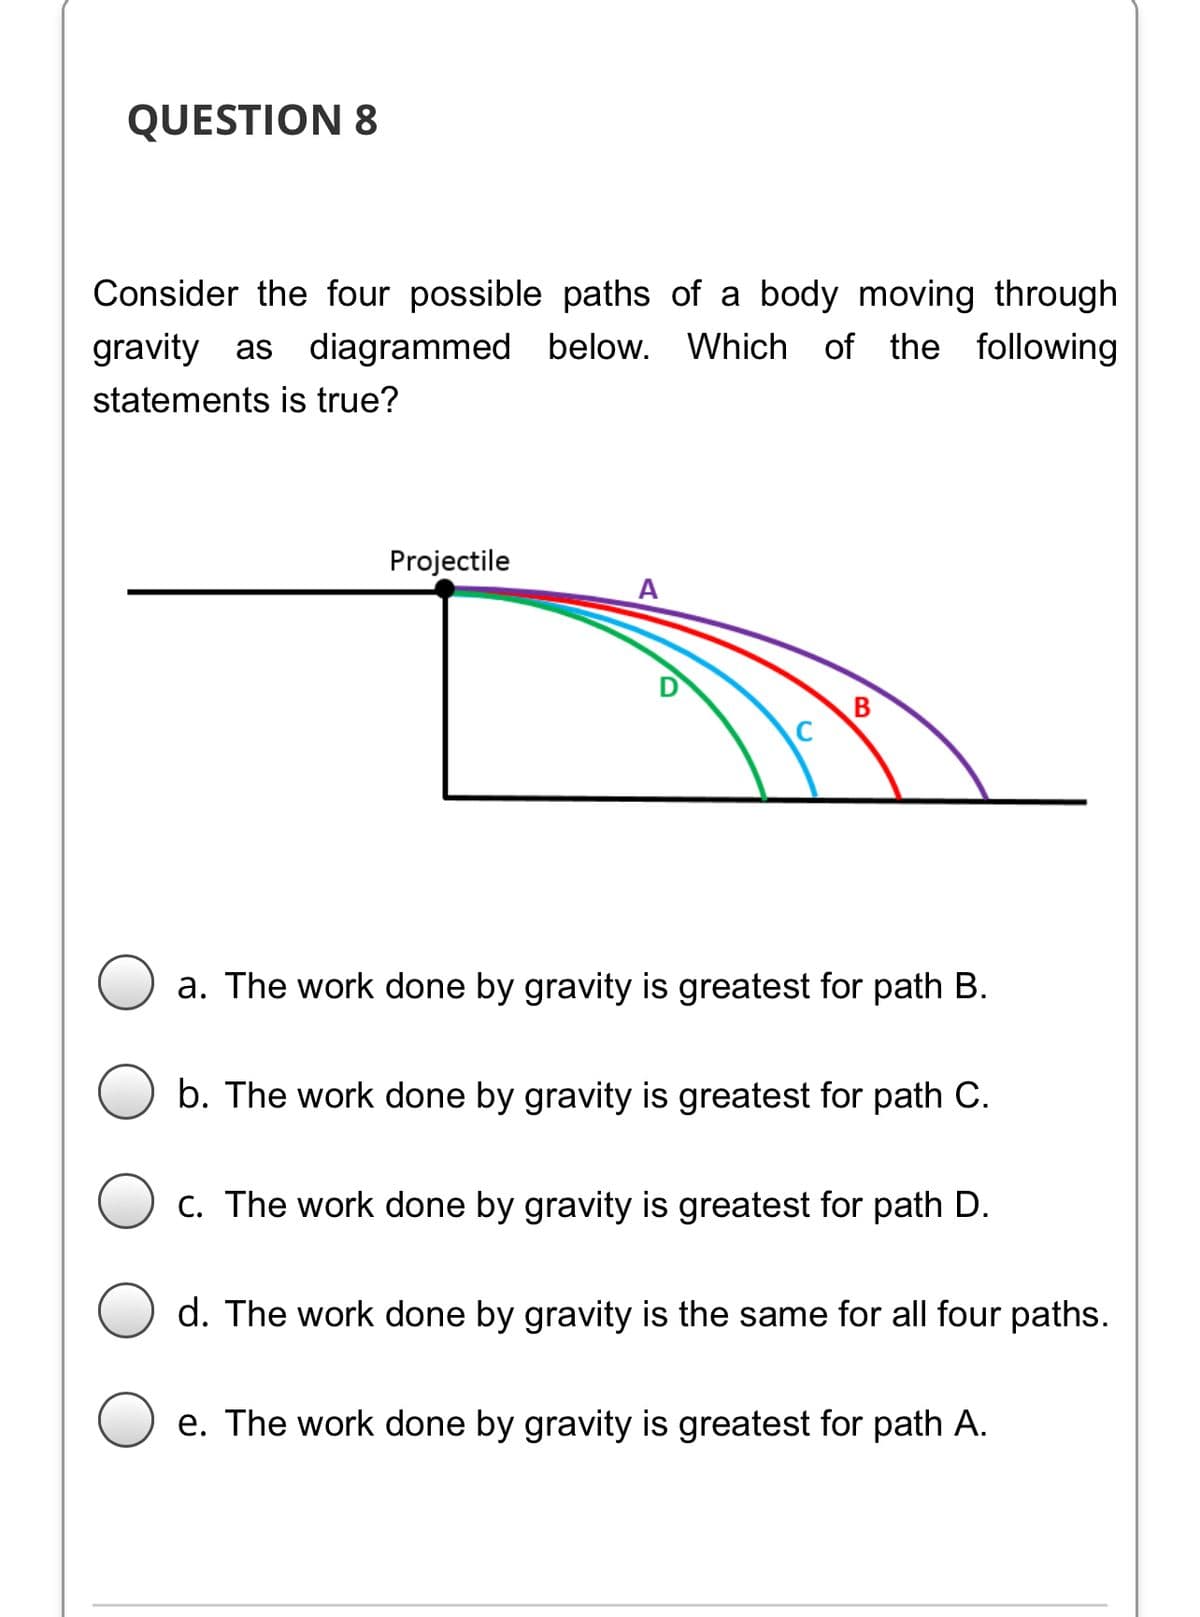 QUESTION 8
Consider the four possible paths of a body moving through
gravity as diagrammed below. Which of the following
statements is true?
Projectile
A
a. The work done by gravity is greatest for path B.
b. The work done by gravity is greatest for path C.
c. The work done by gravity is greatest for path D.
d. The work done by gravity is the same for all four paths.
e. The work done by gravity is greatest for path A.
